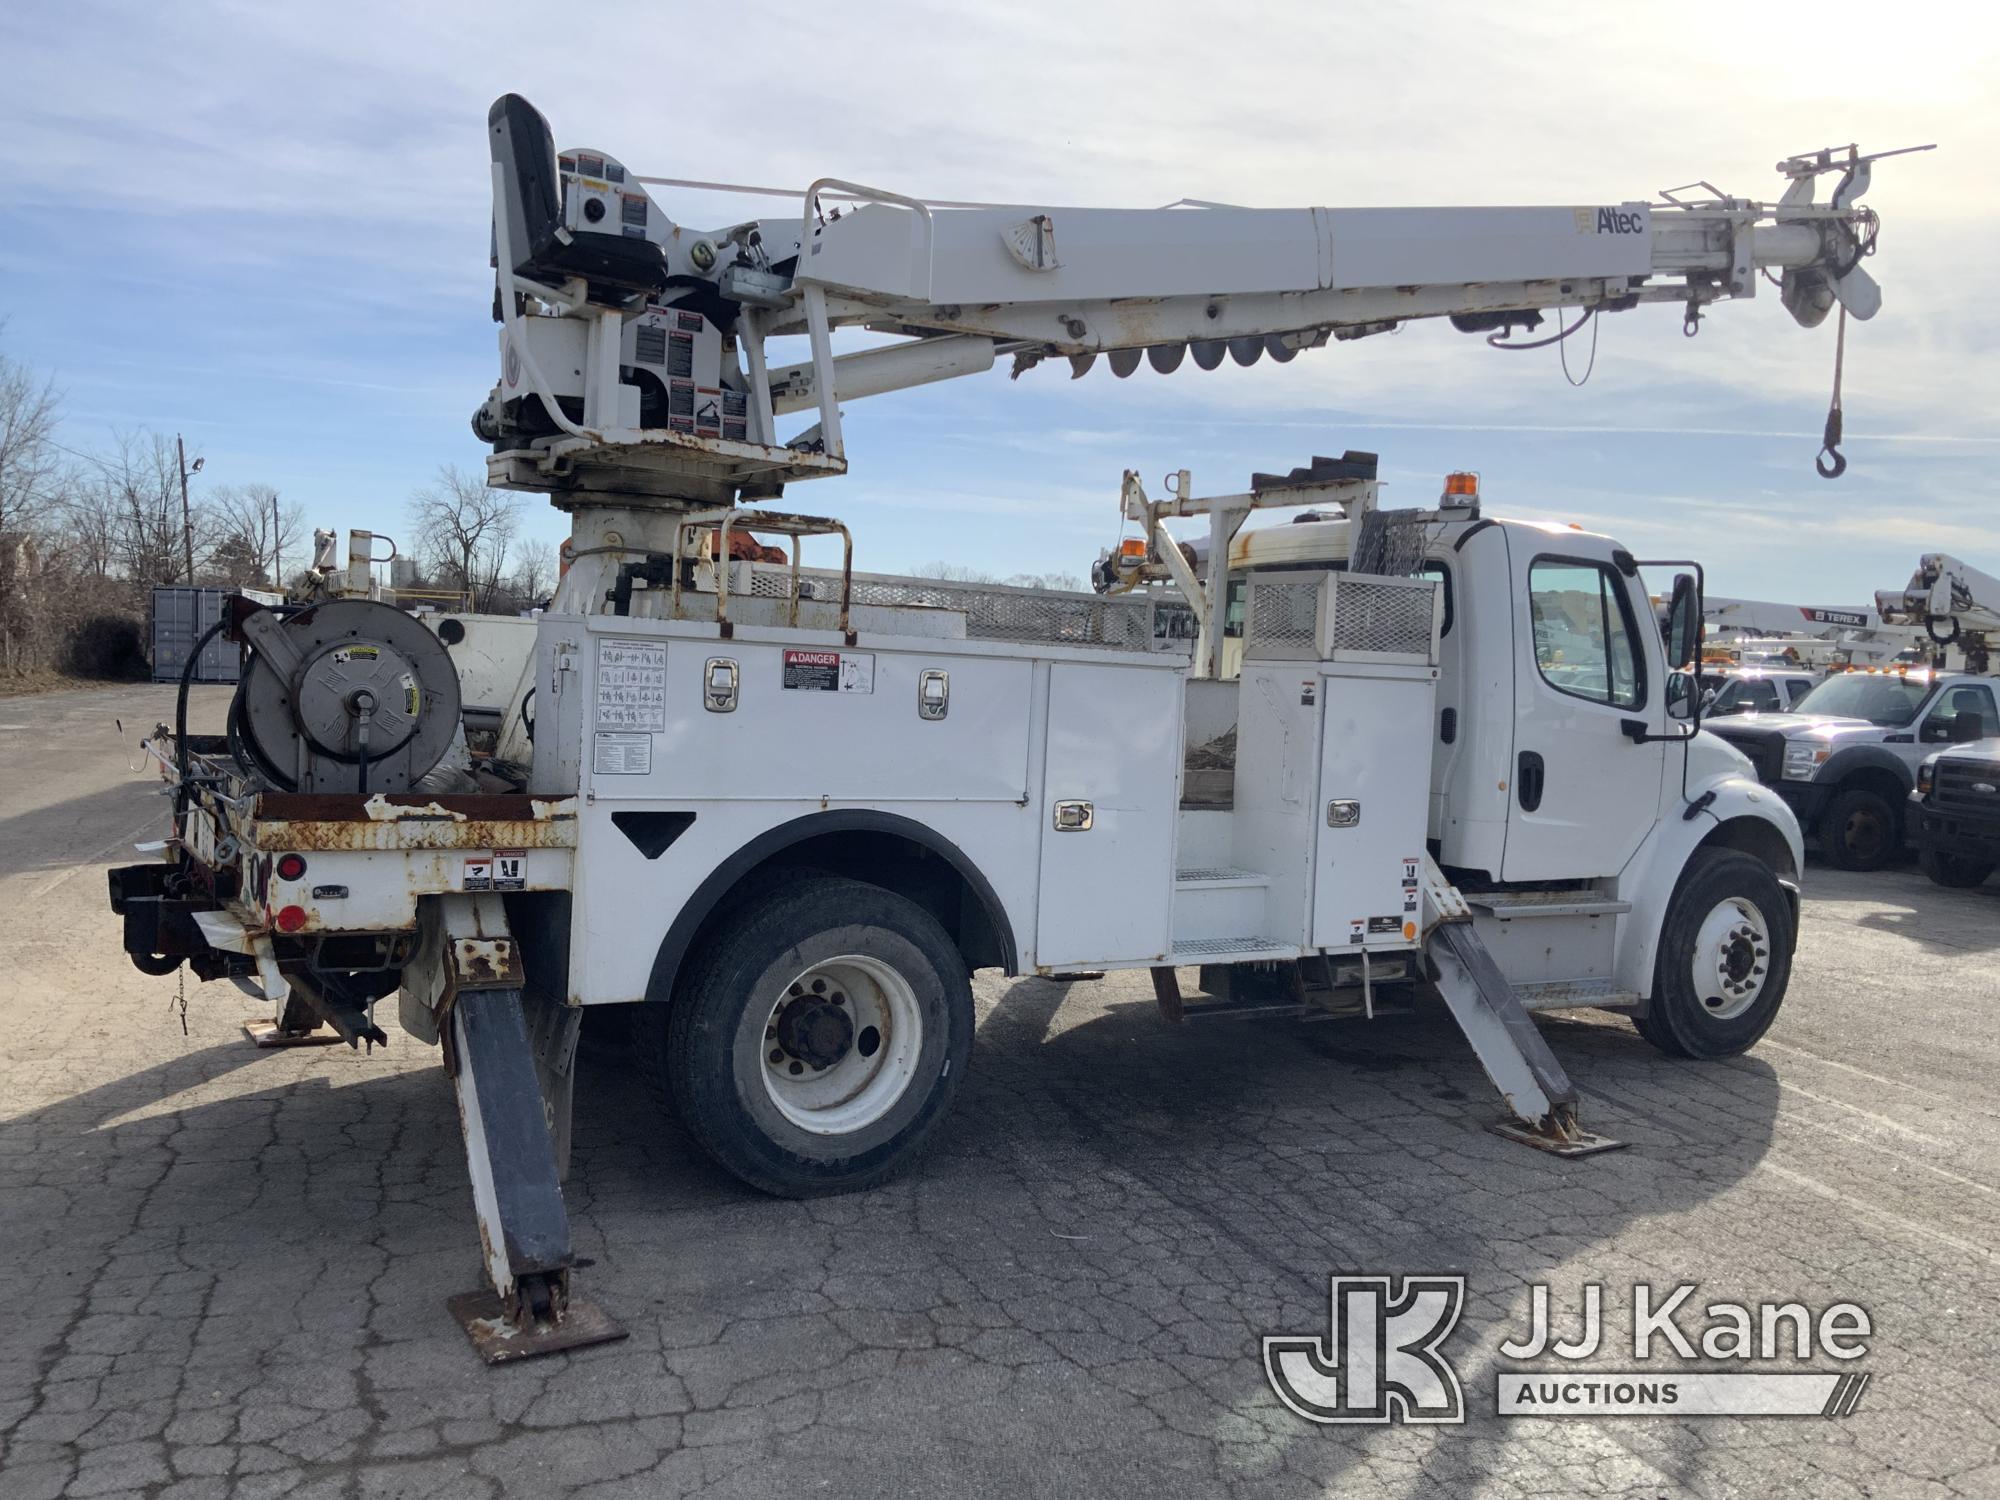 (South Beloit, IL) Altec DC47-TR, Digger Derrick mounted on 2016 Freightliner M2 106 Utility Truck R